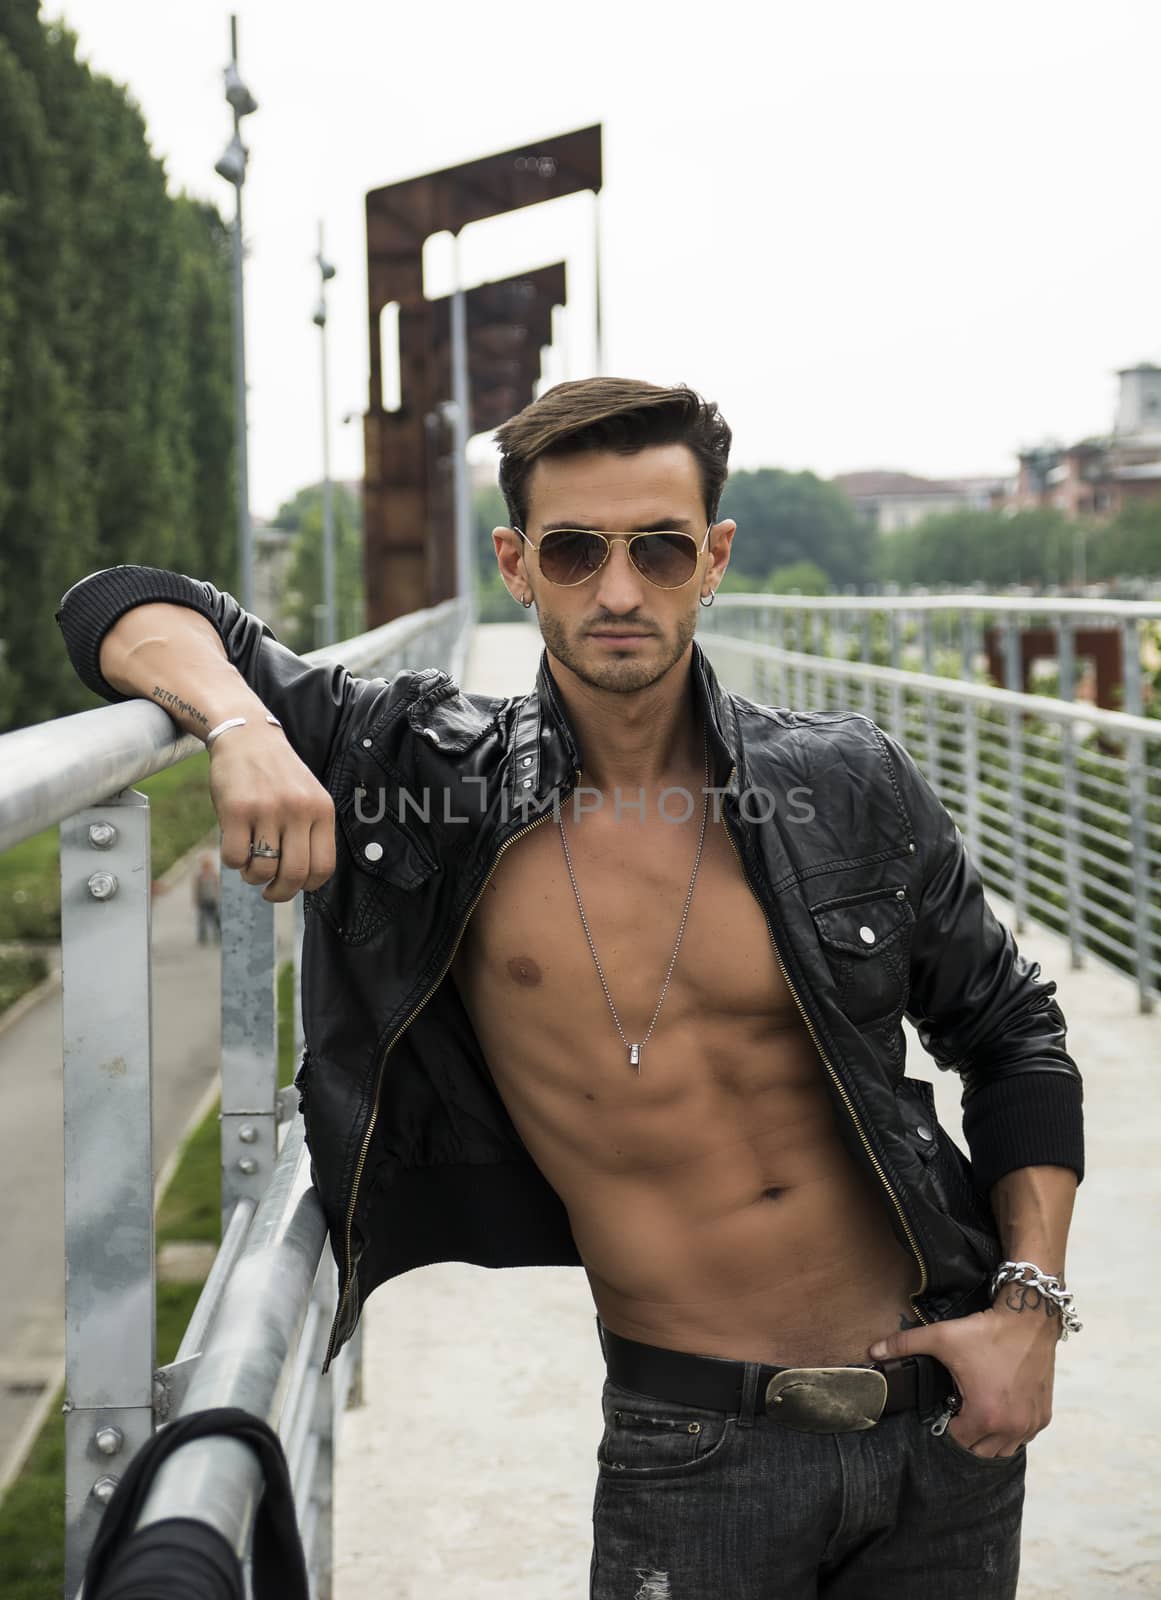 Handsome man outdoor in urban environment wearing leather jacket on naked torso